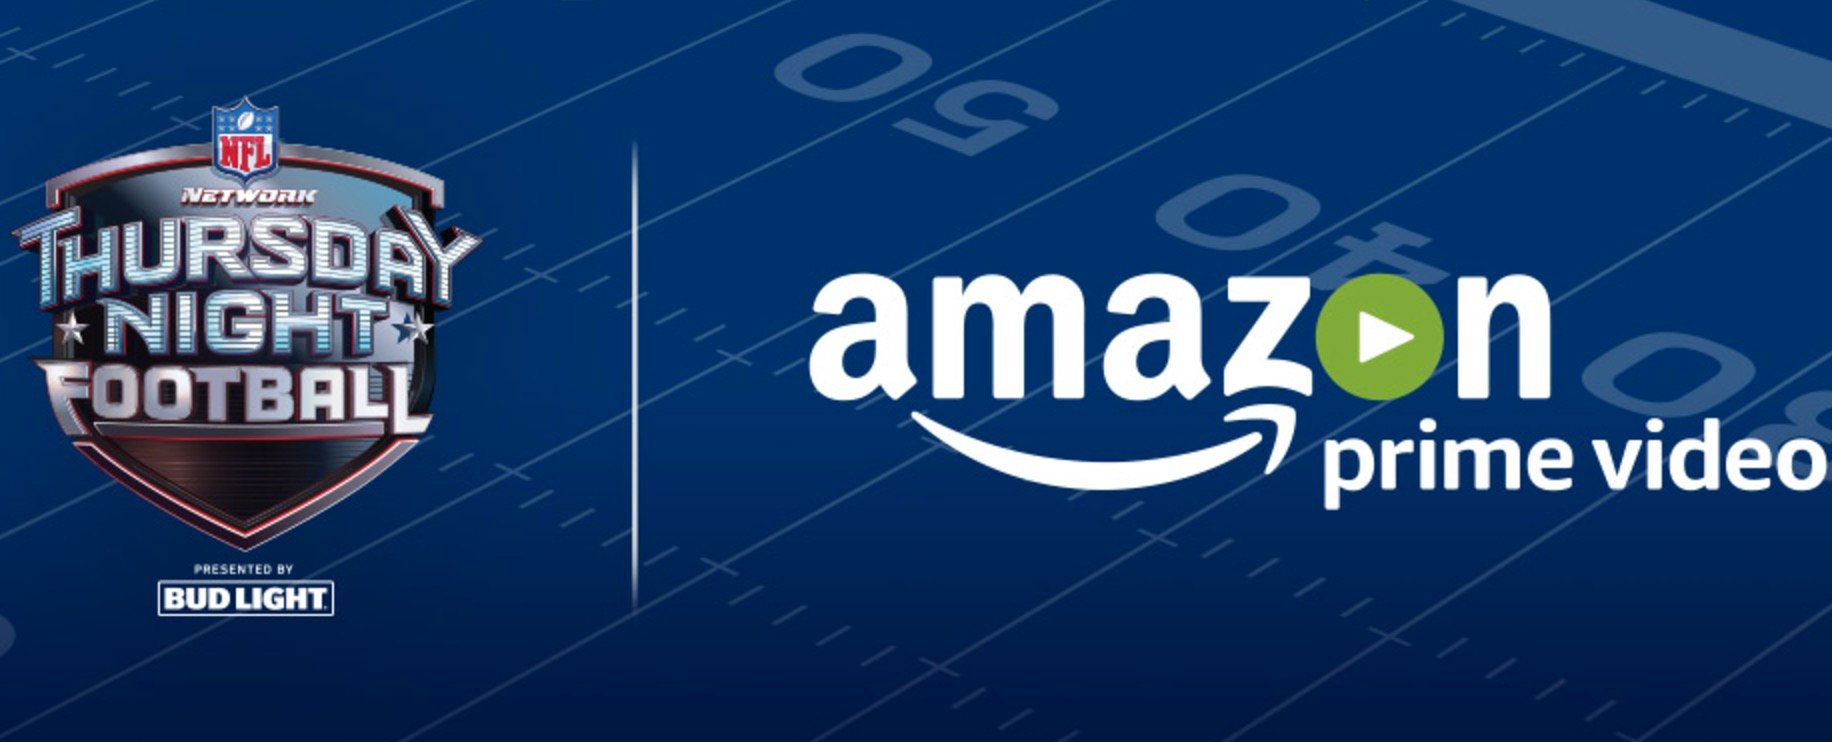 How to Watch Thursday Night Football on Amazon Prime